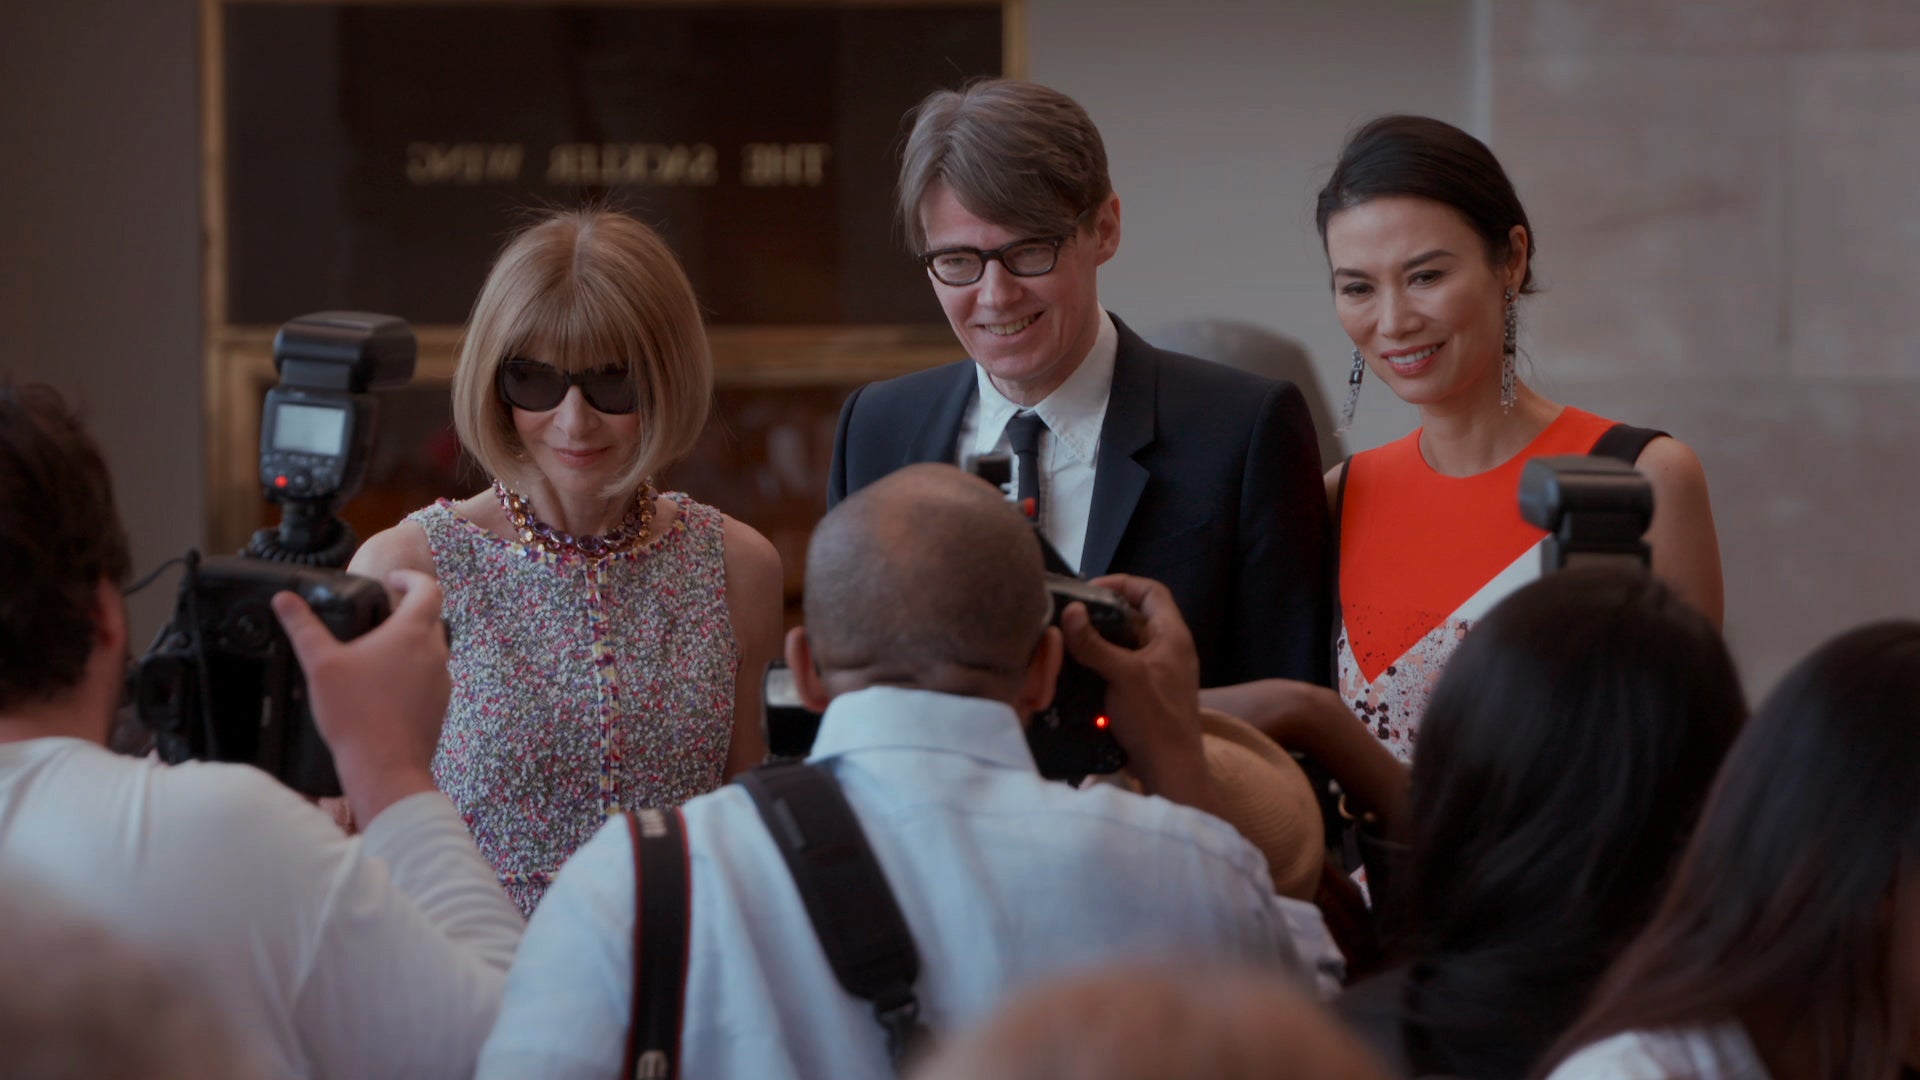 Anna Wintour, Andrew Bolton, and Wendi Murdoch promoting the 2015 Met exhibition "China: Through the Looking Glass," the most successful in the Costume Institute's history